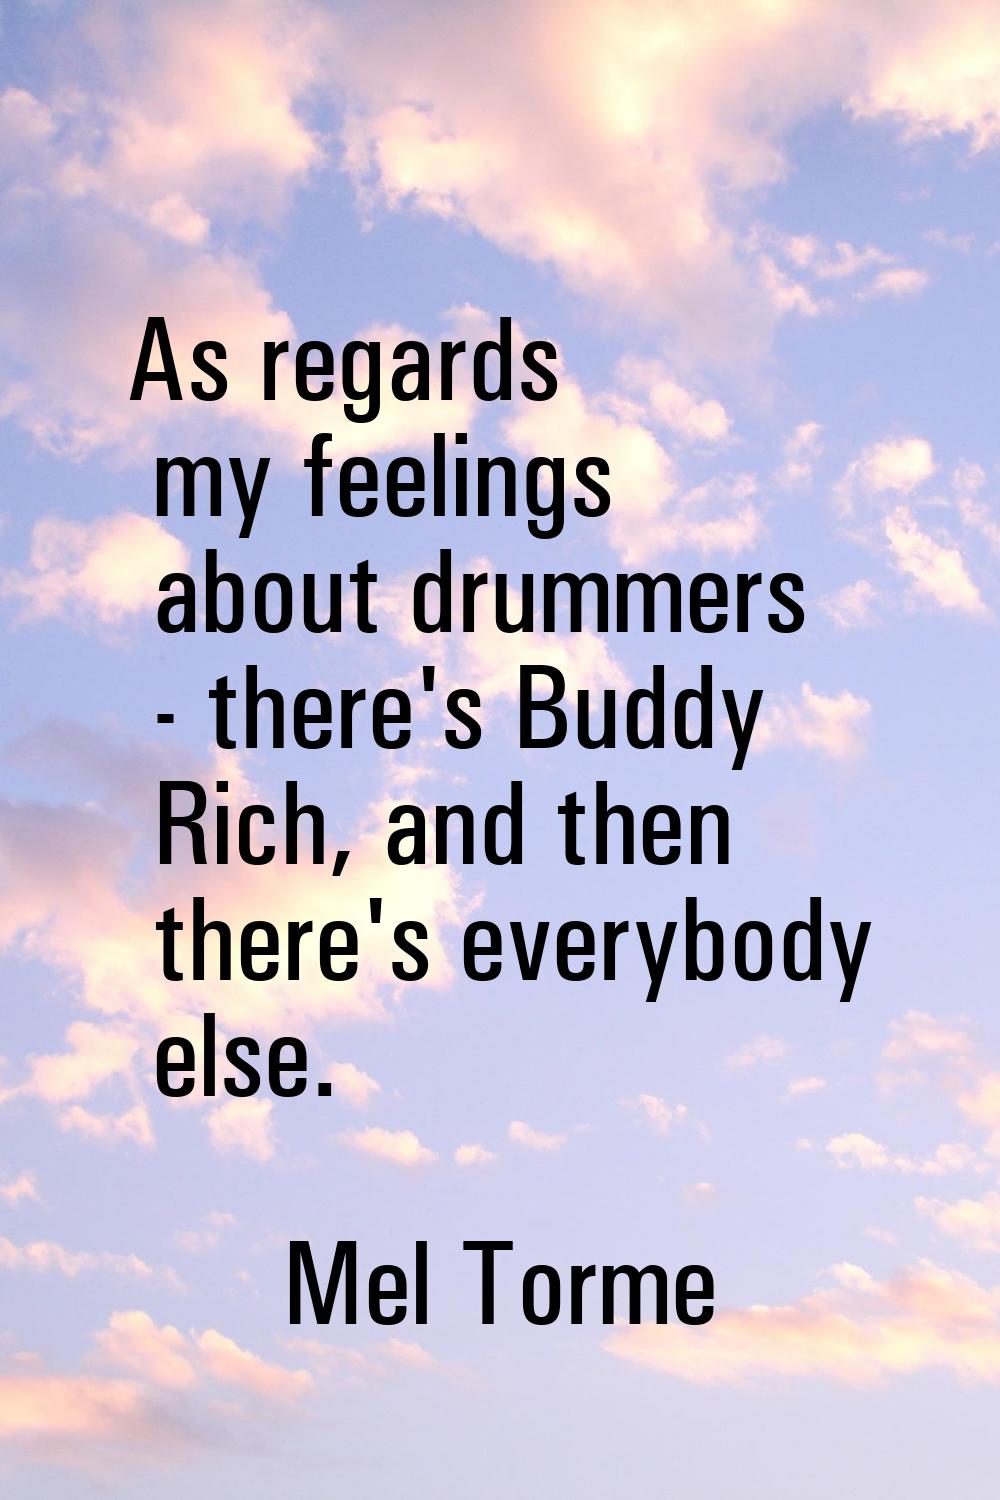 As regards my feelings about drummers - there's Buddy Rich, and then there's everybody else.